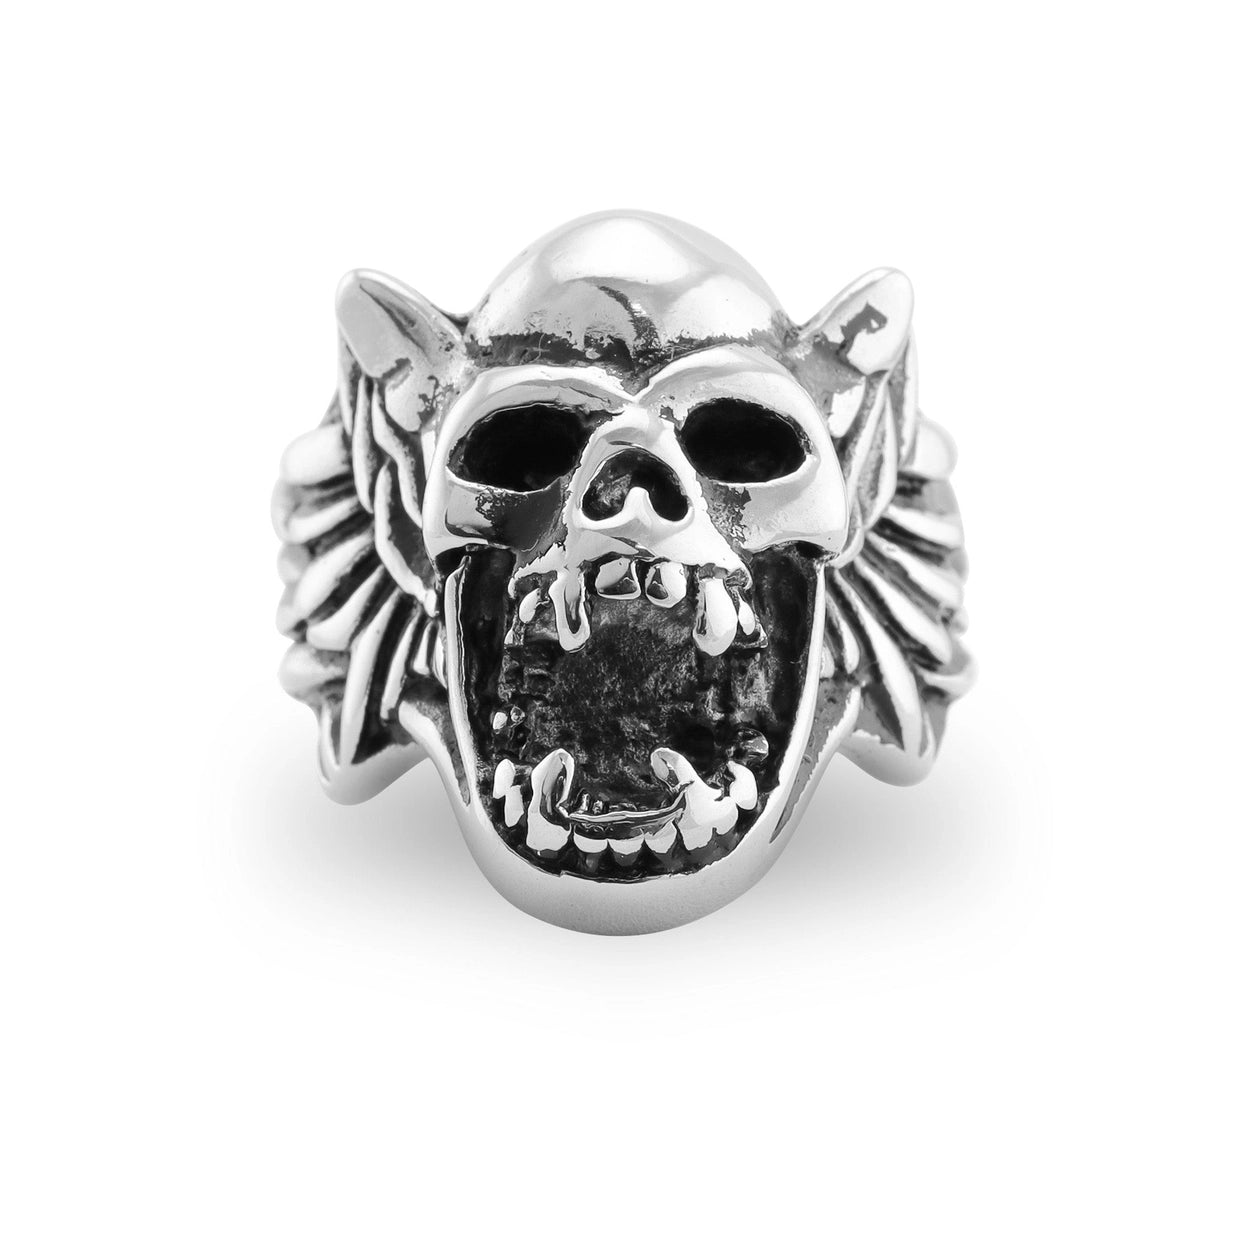 Shiny stainless steel ring depicting a goblin skull with an open mouth. Seen from the front